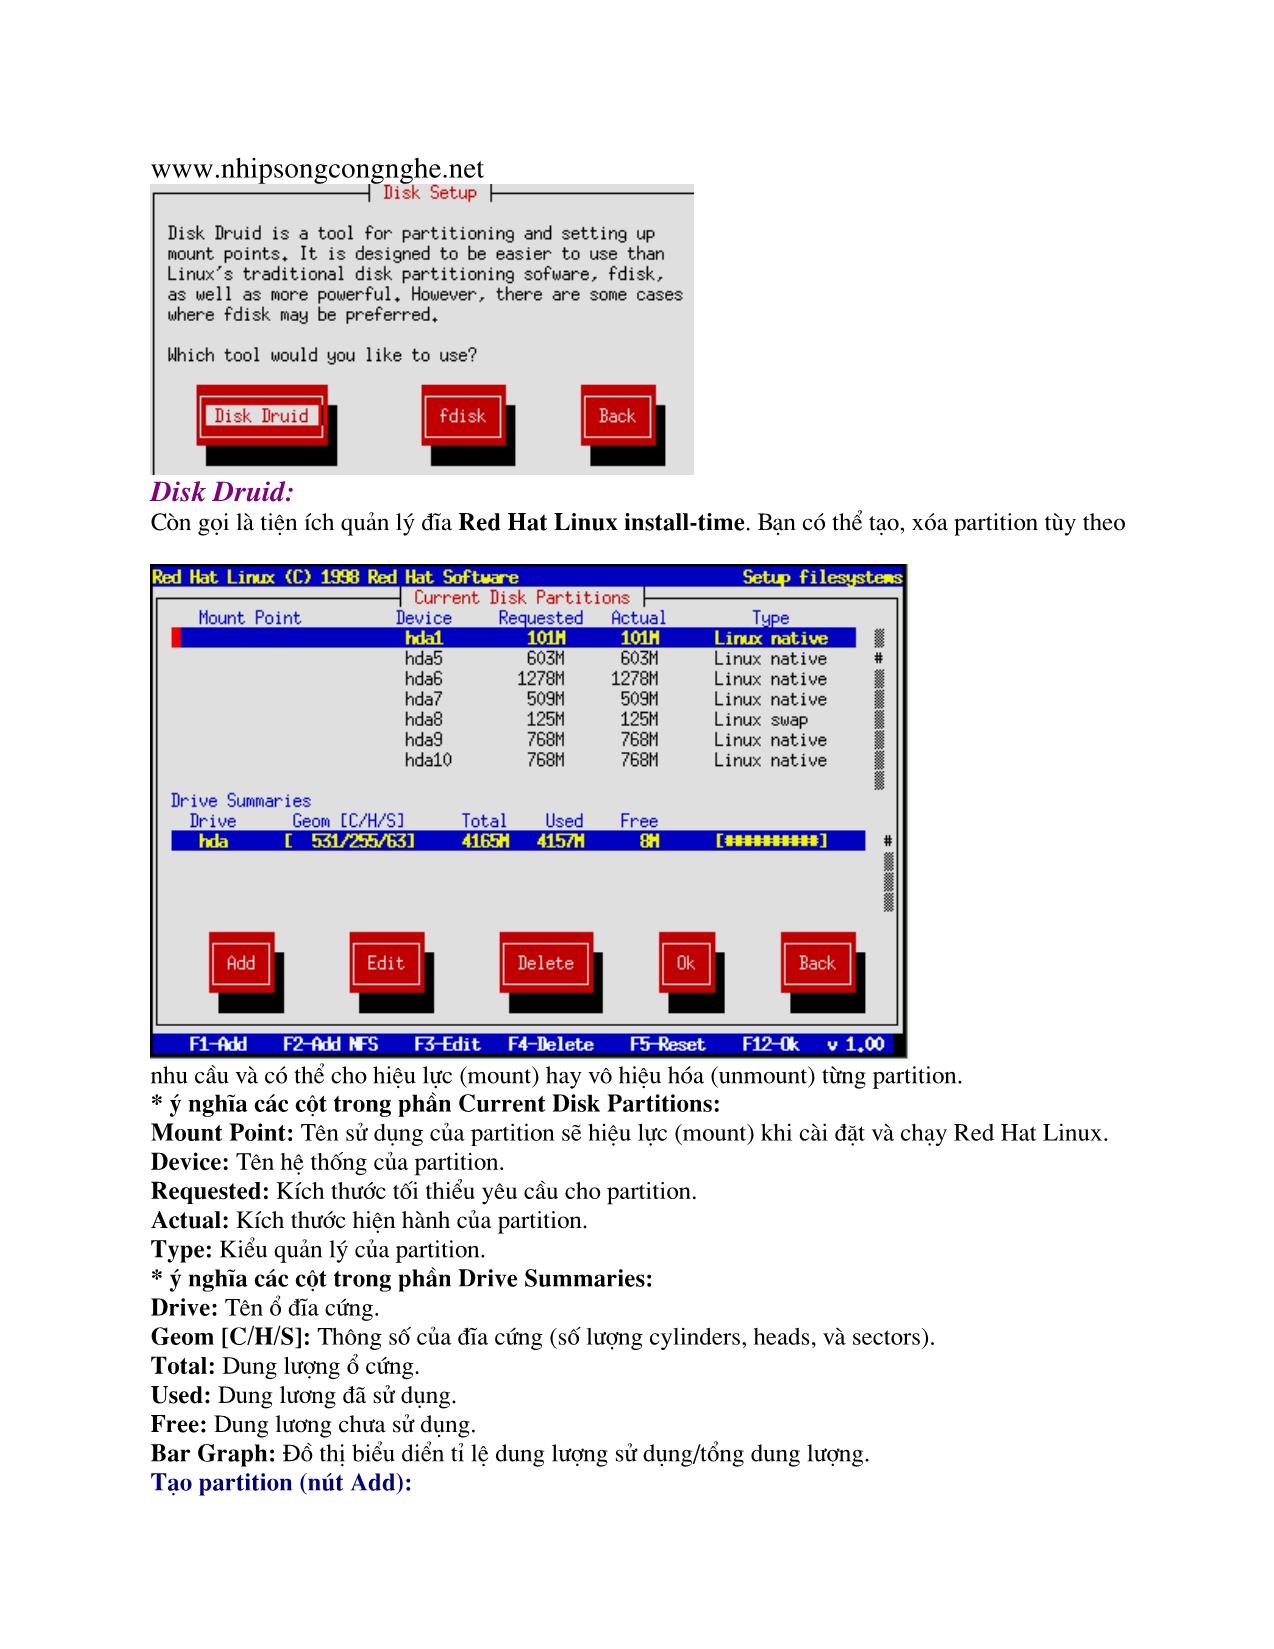 Red Hat Linux 5.1 trang 5